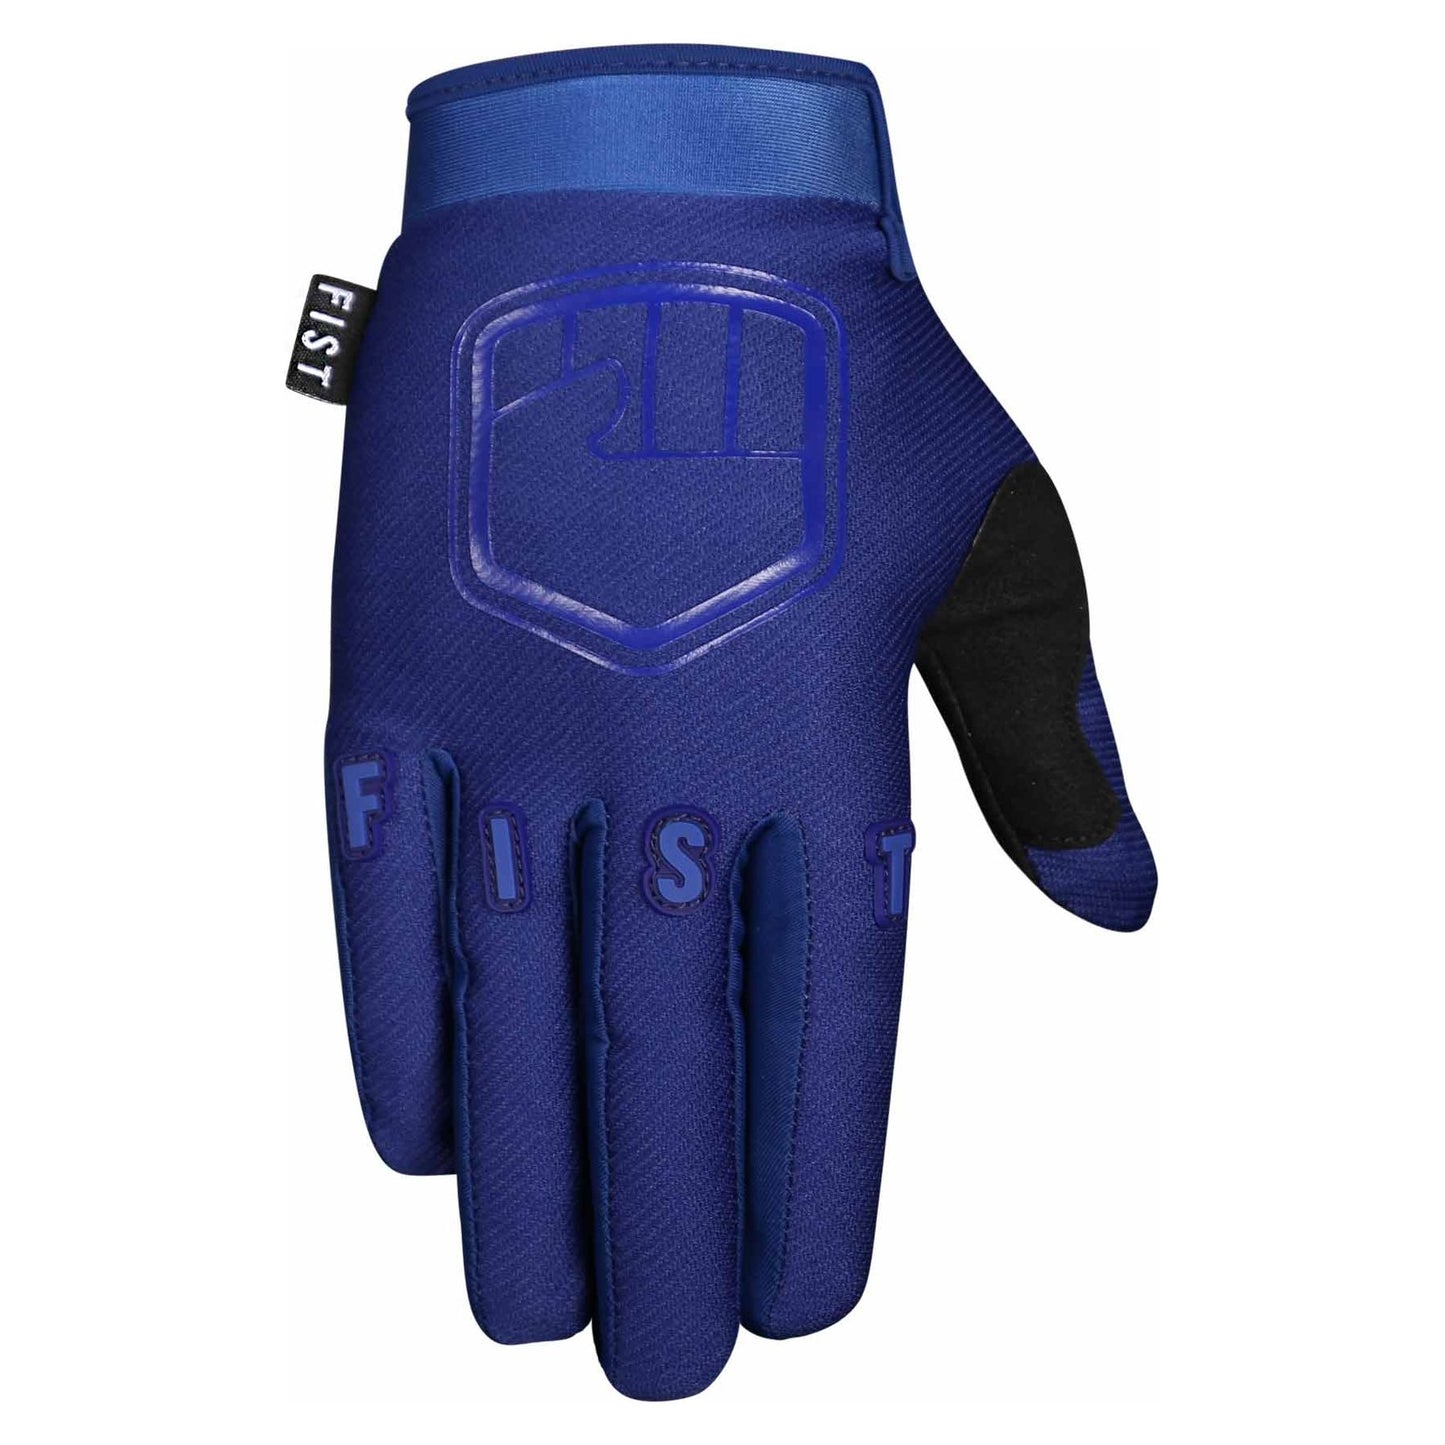 Fist Handwear Stocker Youth Strapped Glove - Youth L - Blue Stocker - Image 1